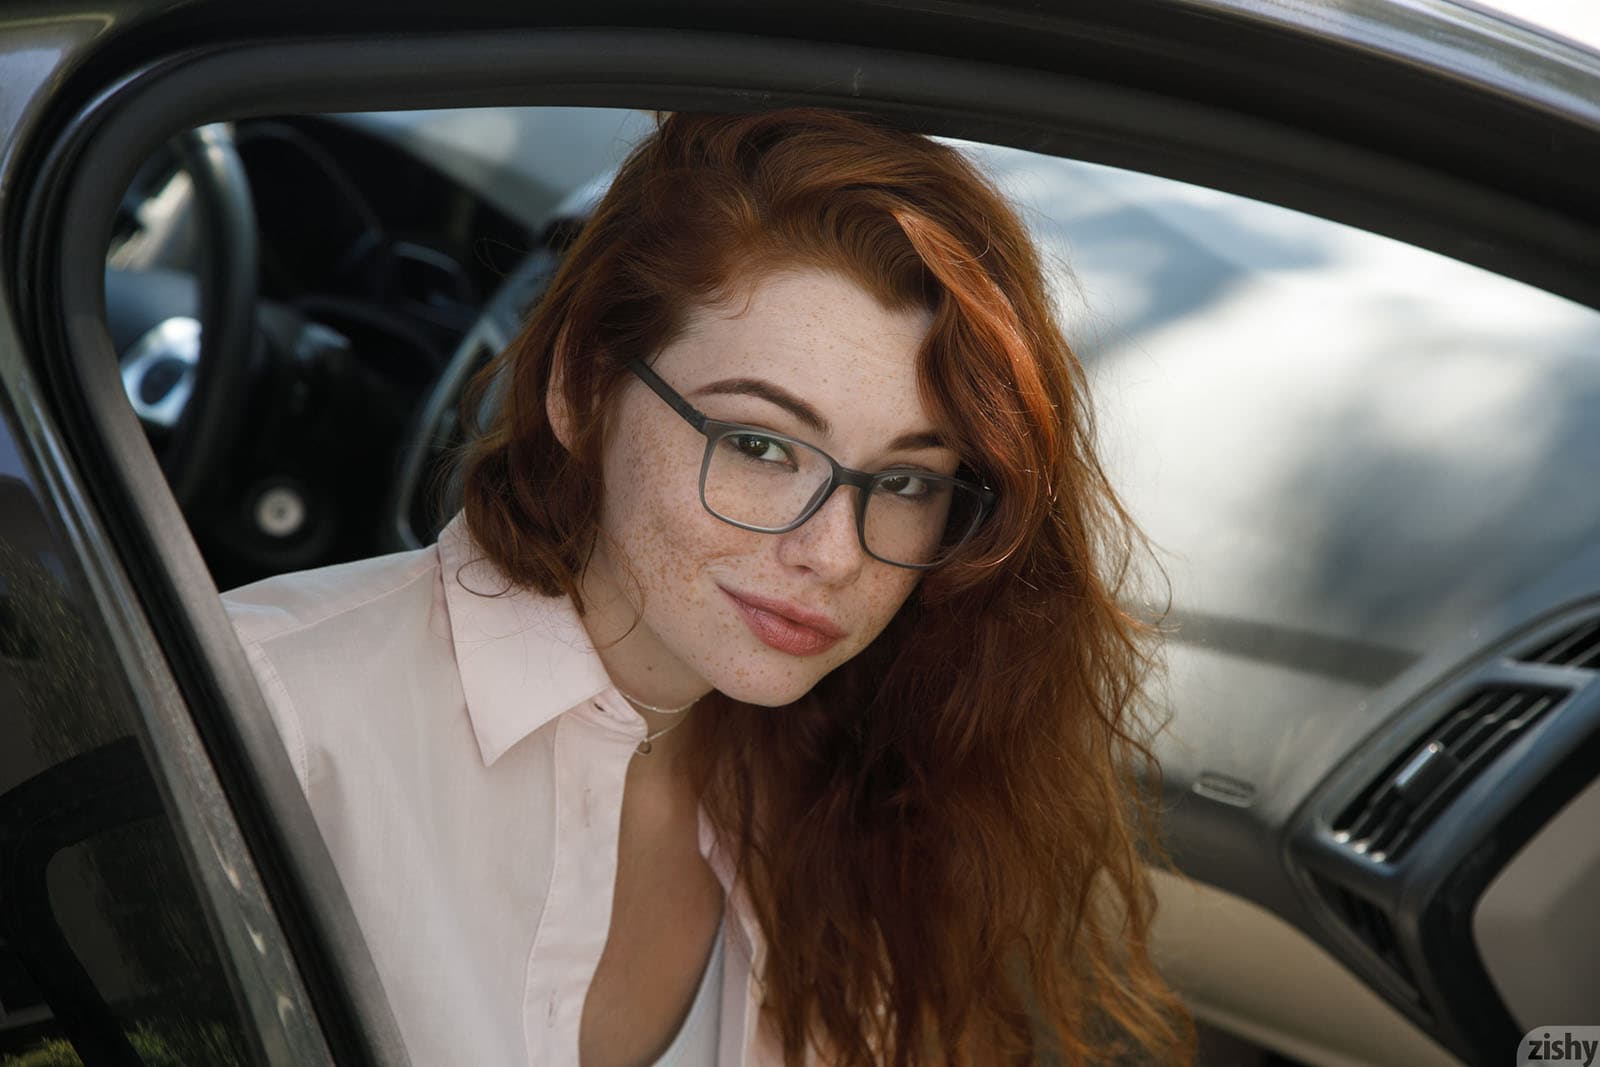 People 1600x1067 Sabrina Lynn face redhead car Zishy glasses women with glasses smiling long hair looking at viewer vehicle car interior women model freckles